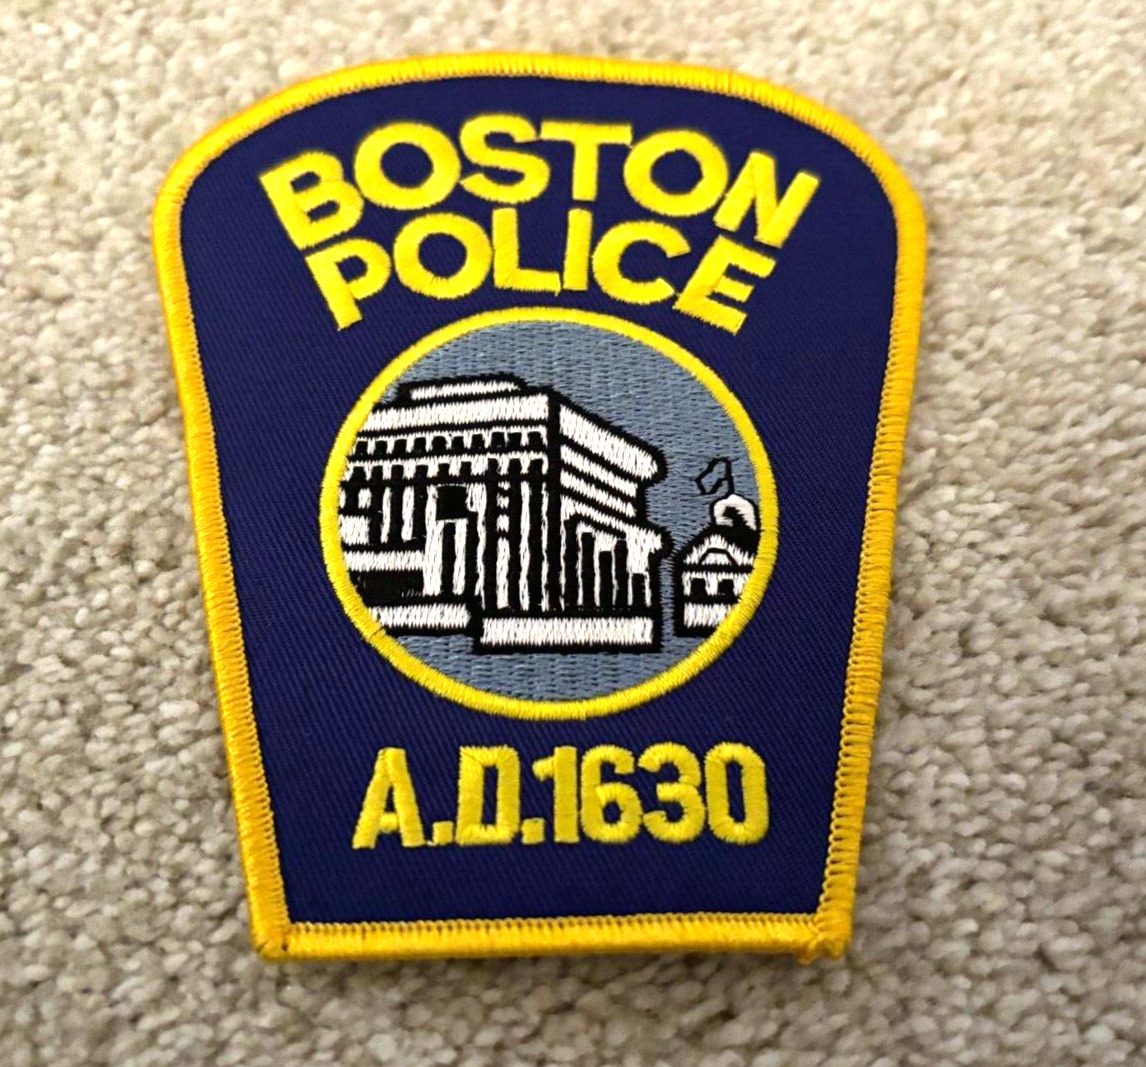 BOSTON MASSACHUSETTS POLICE DEPARTMENT PATCH - POLICE UNITY TOUR - NEW A.D. 1630